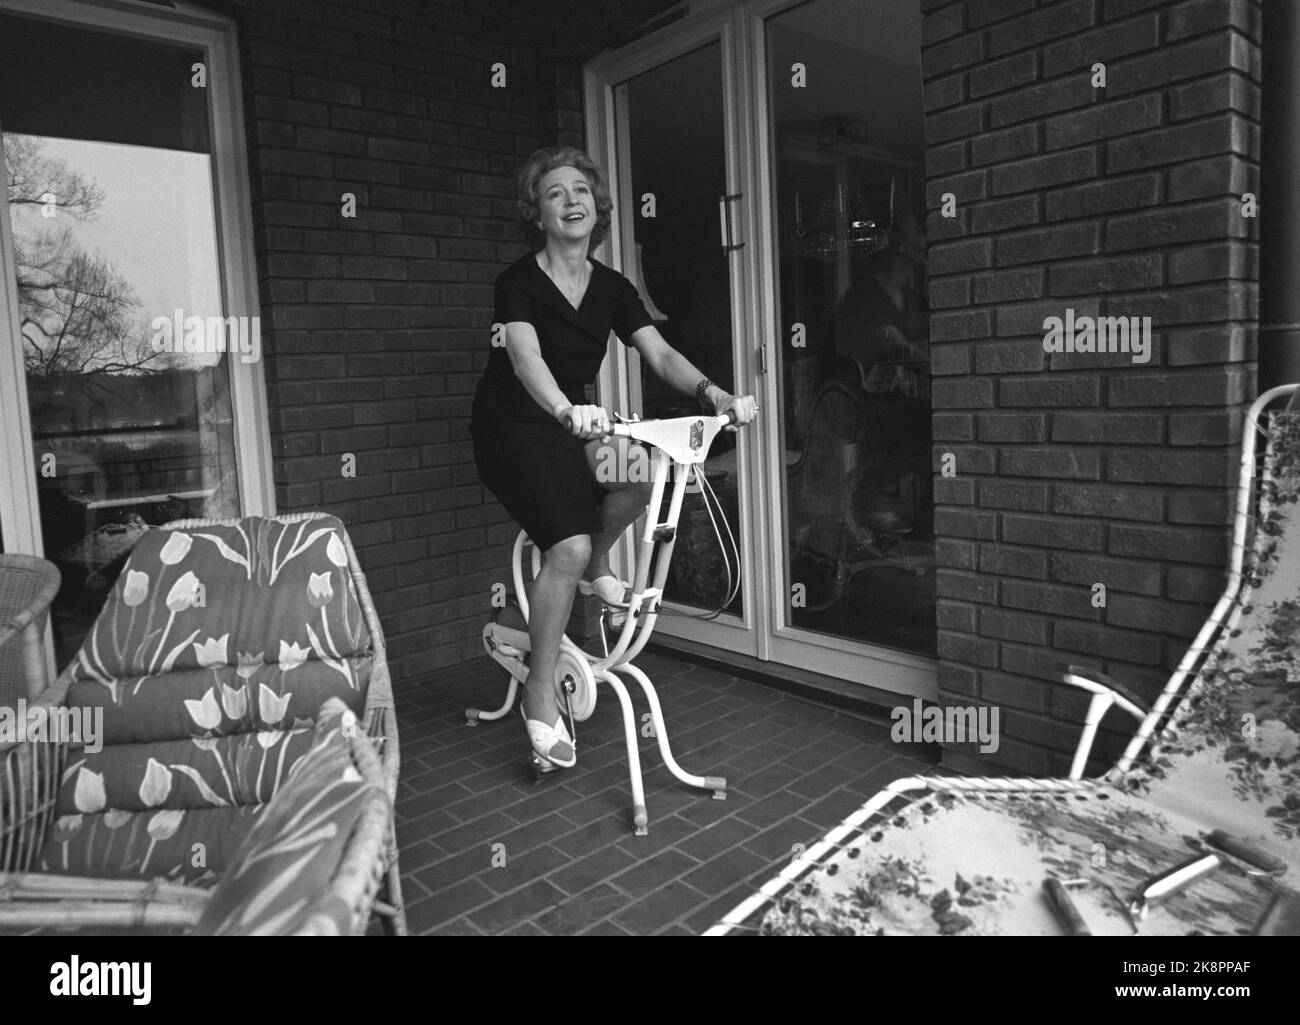 Oslo on May 13, 1967. Actress Wenche Foss sitting on his ergometer bike. Photo: Ivar Aaserud / Current / NTB Stock Photo